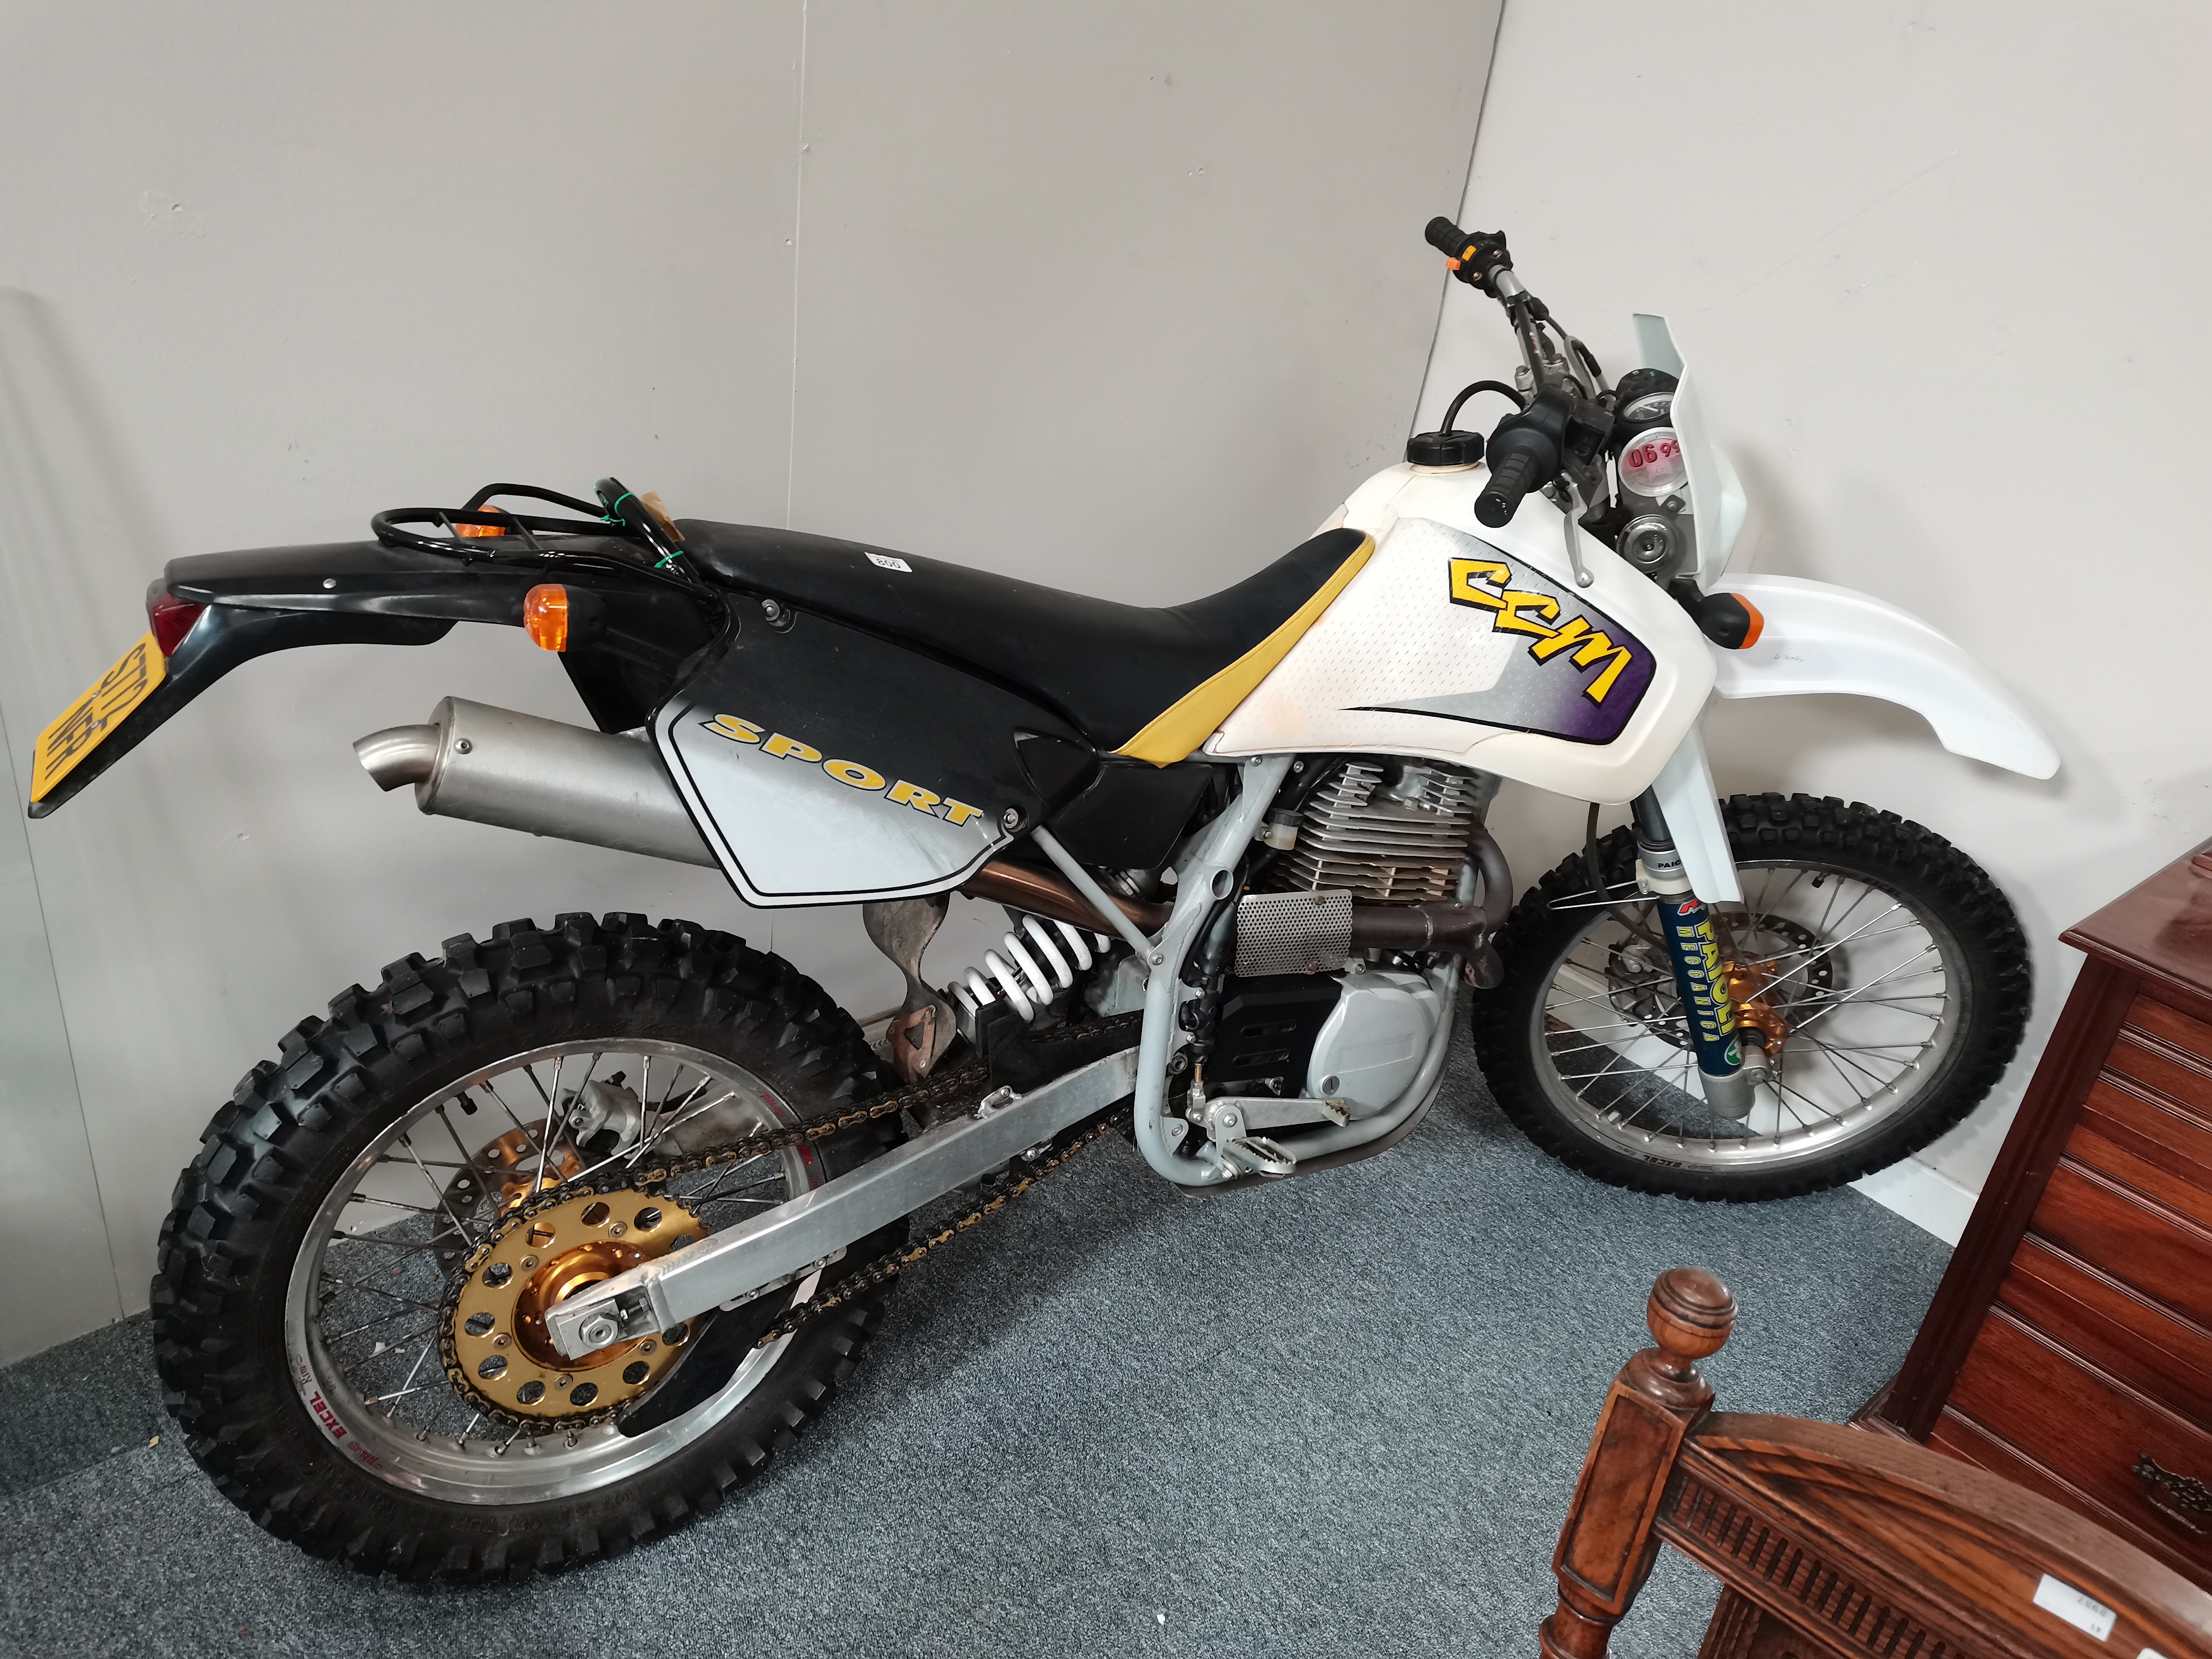 CCM sport 600cc trial bike S772NFR with only 222 miles from new taxed 99